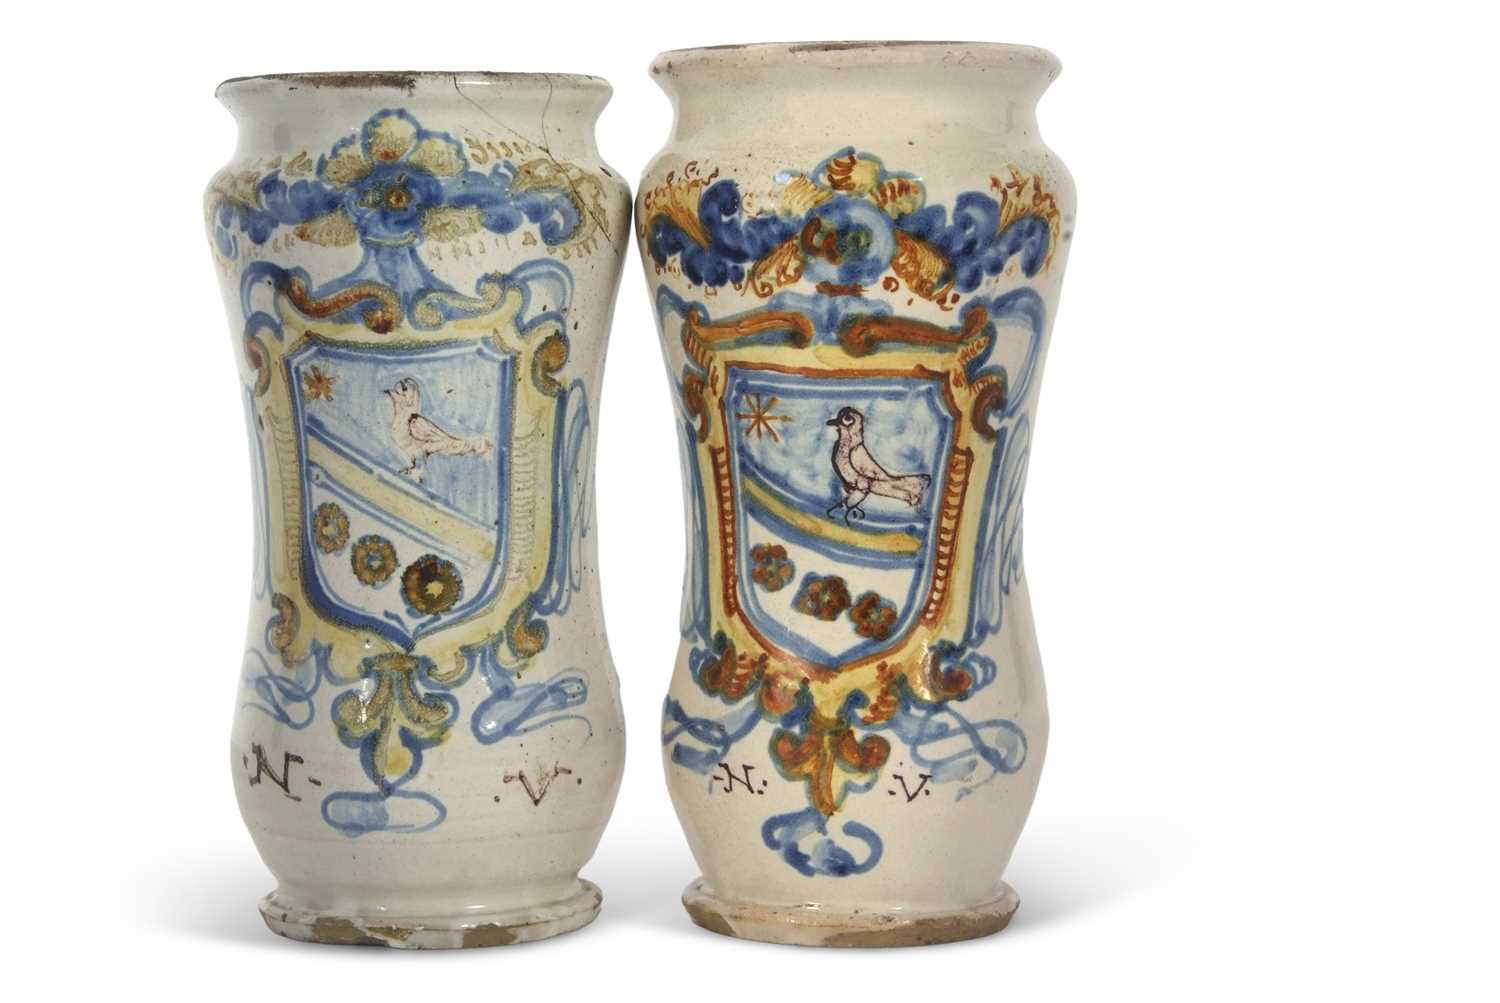 A pair of Italian Faience Alberelli with polychrome designs of an armorial with the initials NV,